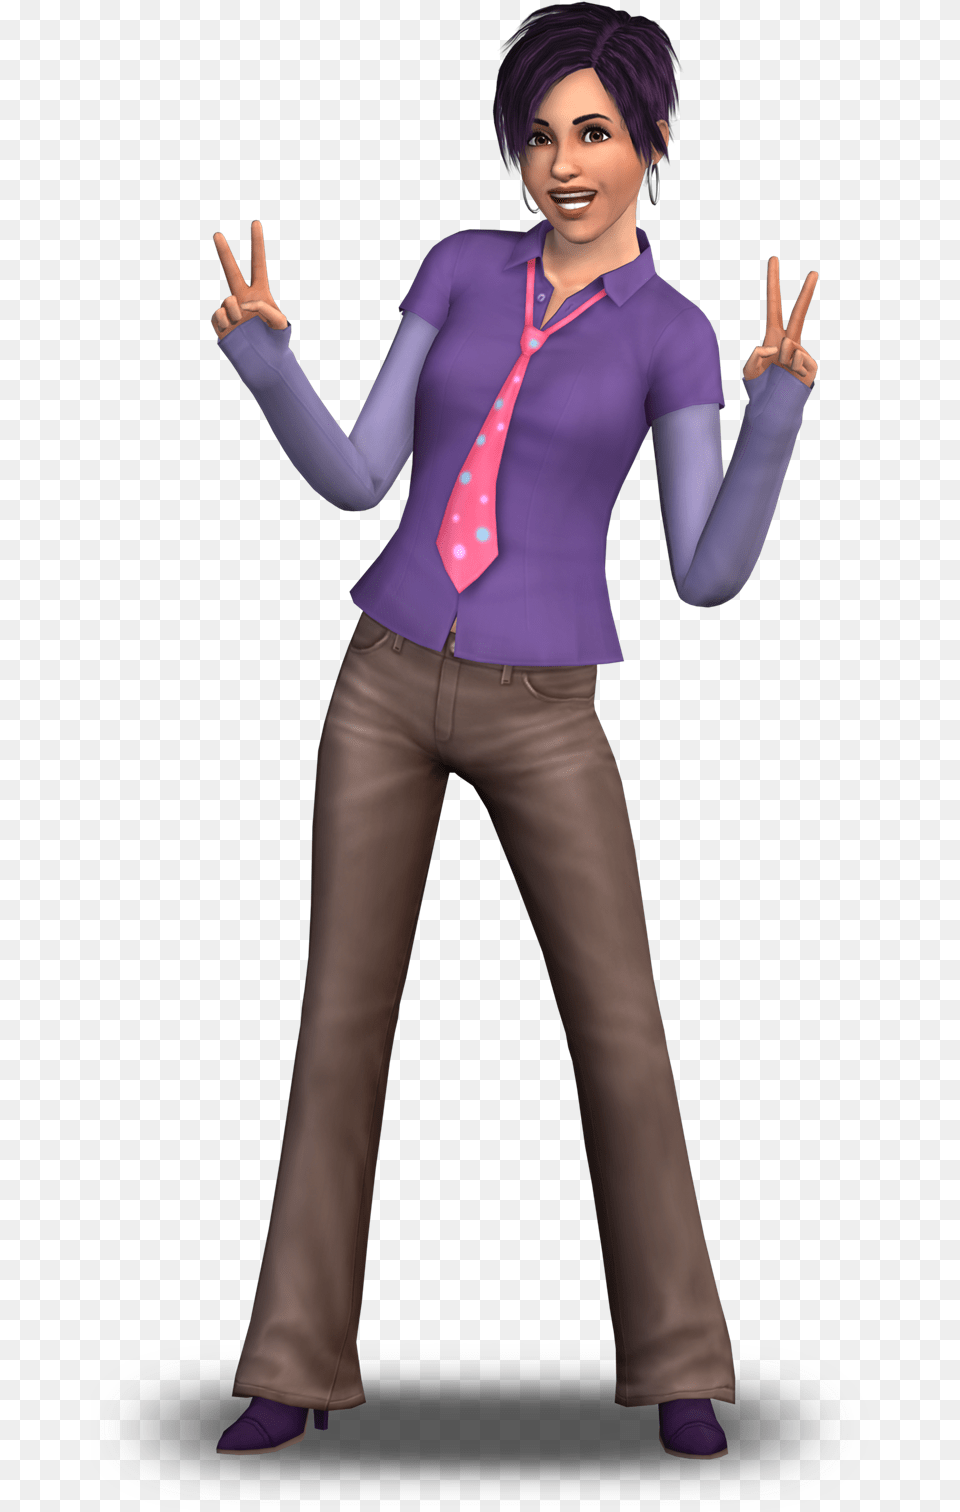 Smiley Face Smiley Face Sims 4 Comprar Na Saraiva, Accessories, Tie, Sleeve, Pants Free Png Download